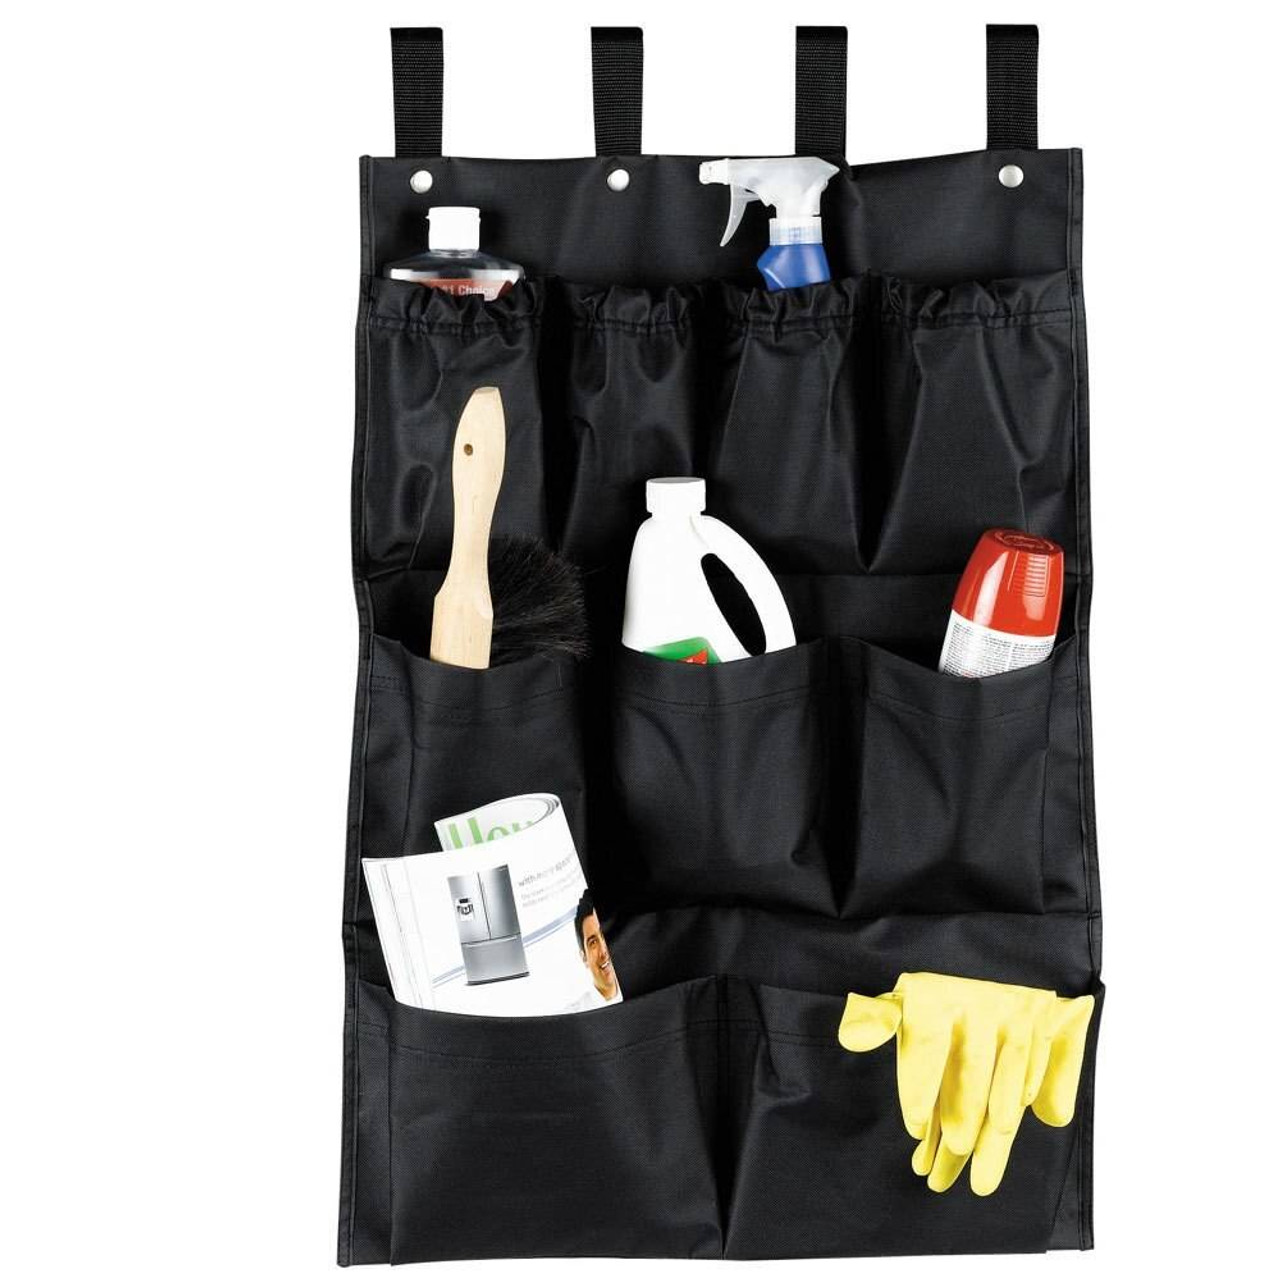 HOSPITALITY 1 SOURCE HOSPITALITY 1 SOURCE or 9 POCKET or X DUTY HOUSEKEEPING or CADDY BAGS or 19x32 or BLACK or 5 PER CASE